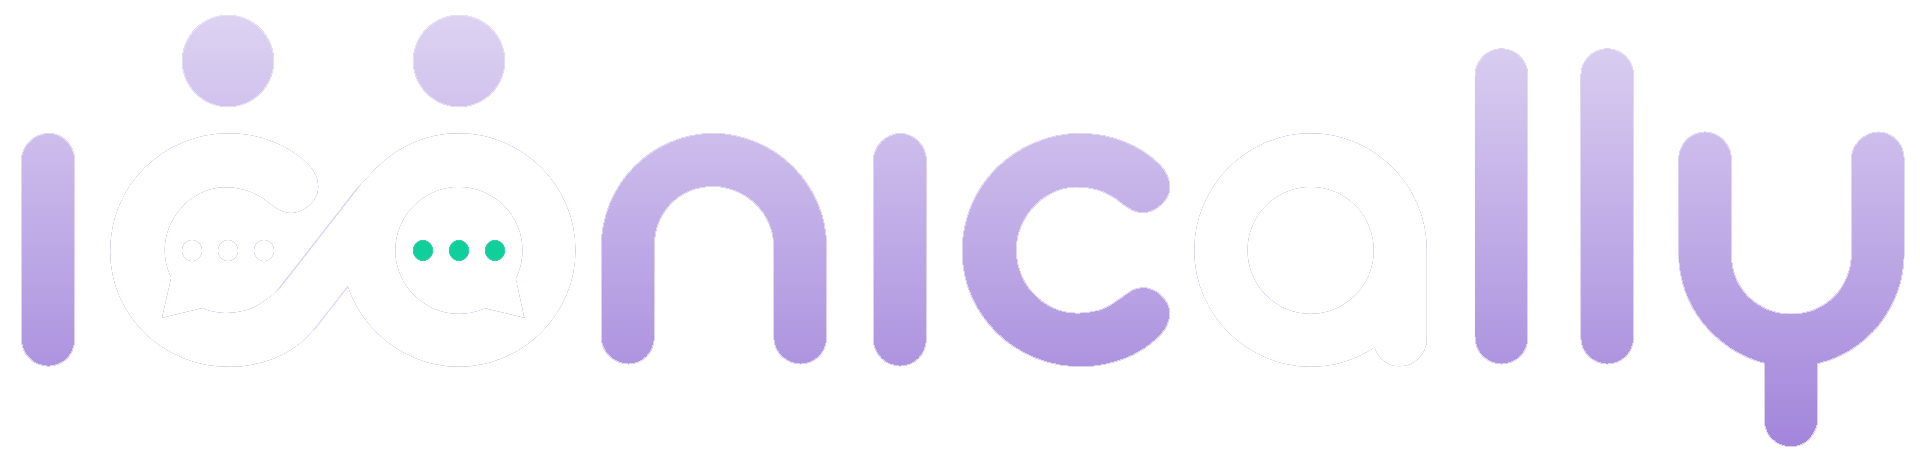 Iconically - Powering Influencer Pay Transparency